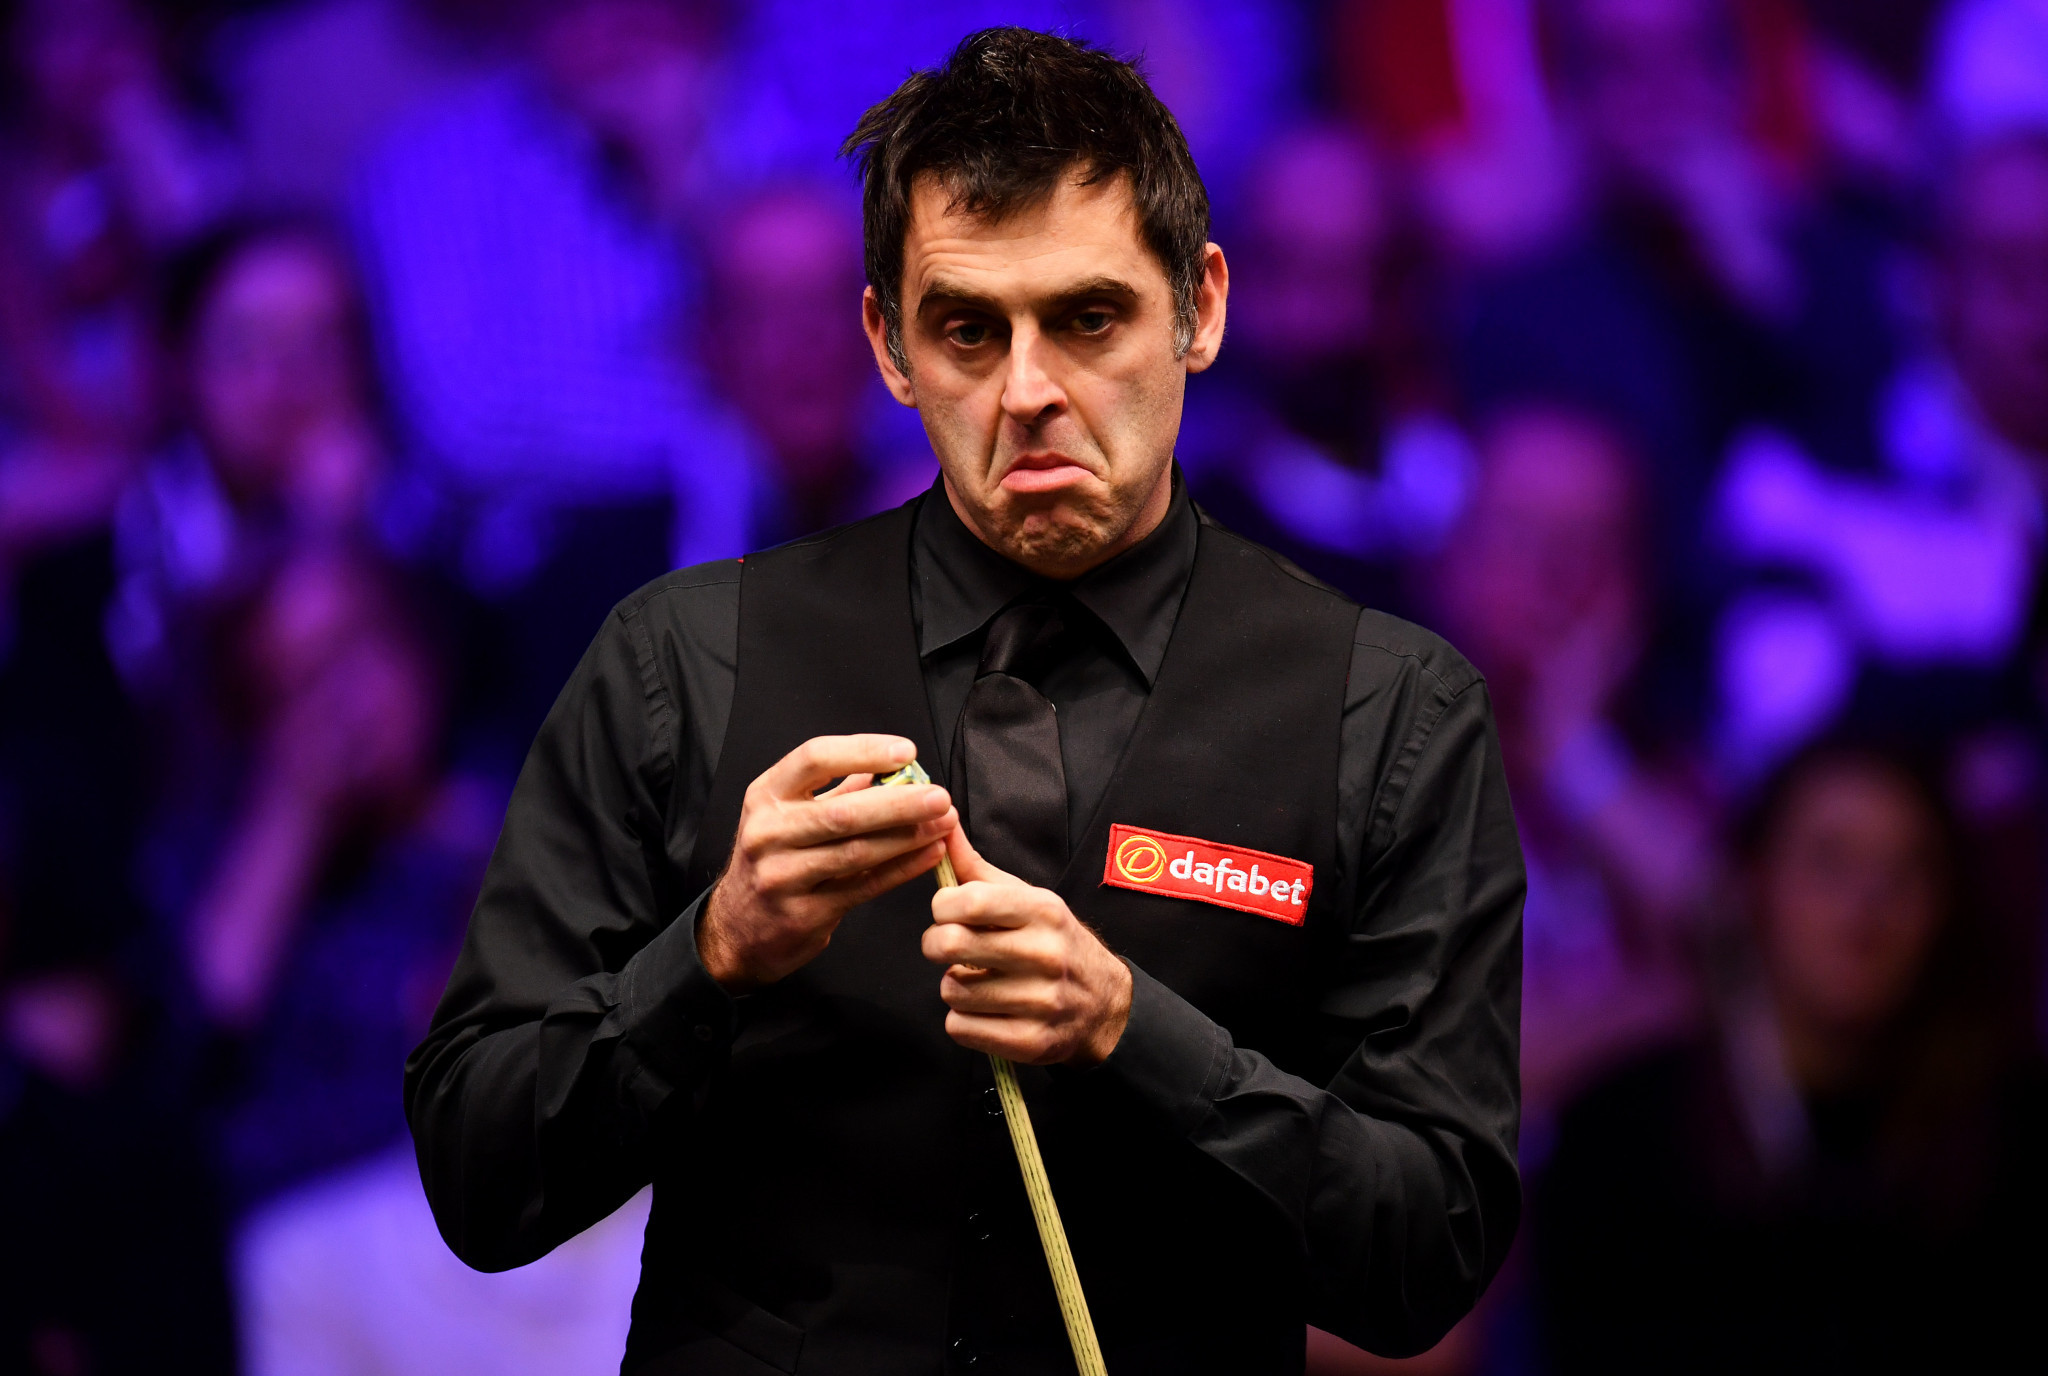 Ronnie O’Sullivan will begin his bid for a sixth World Snooker Championship title tomorrow when he faces Stephen Maguire in the first round of the 2018 edition in Sheffield ©Getty Images